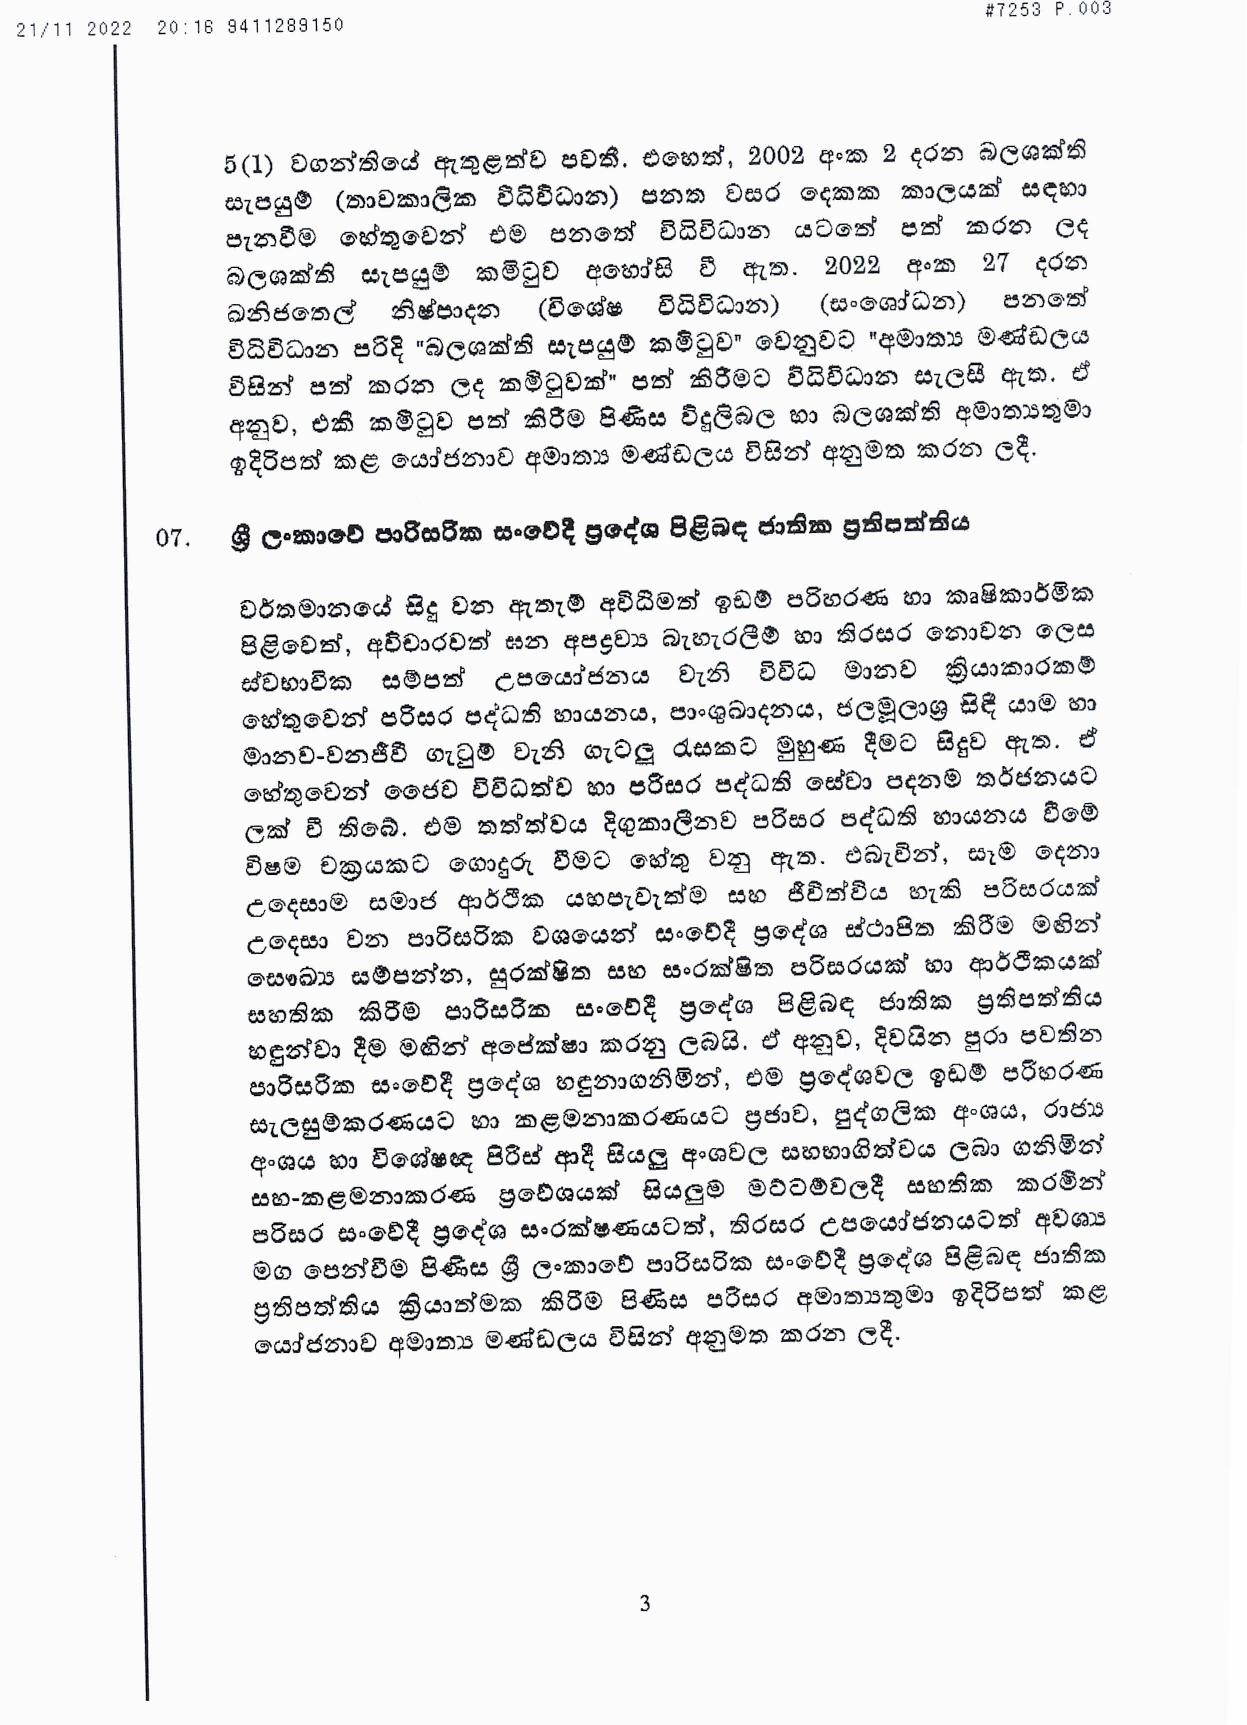 Cabinet Decision on 21.11.2022 page 003